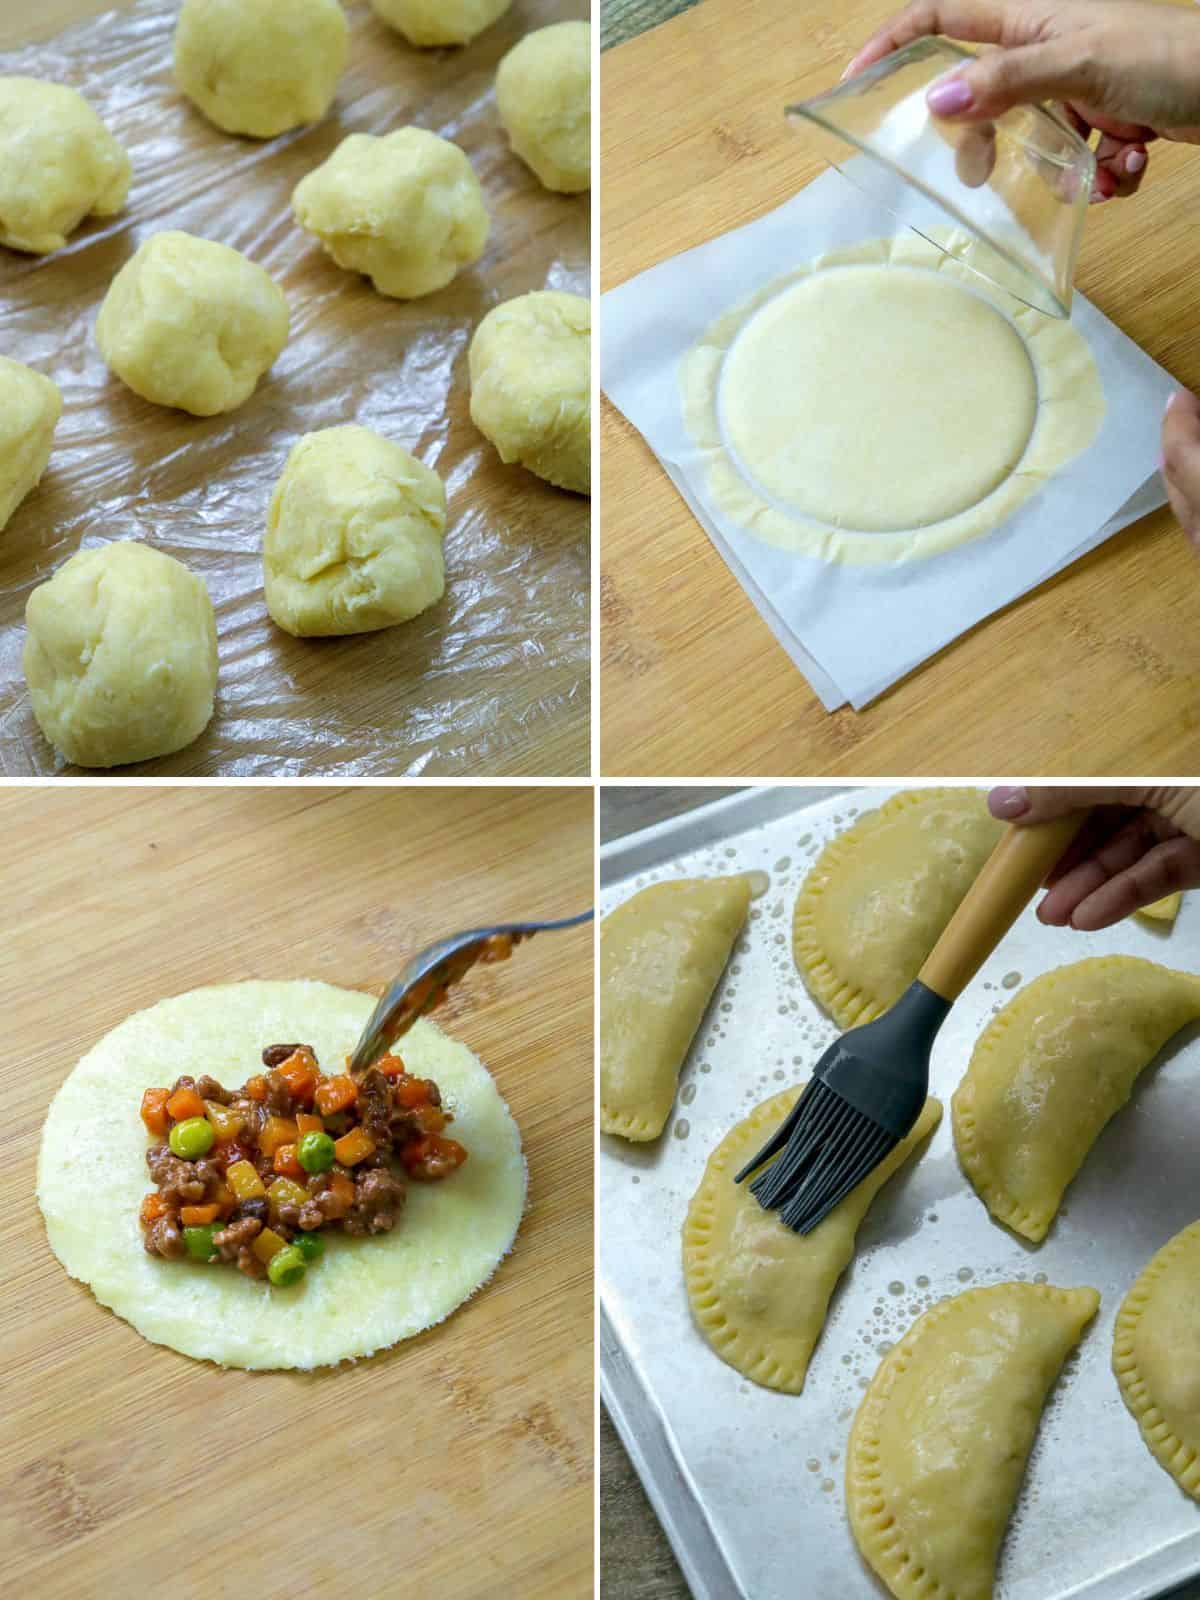 assembling empanadas with ground beef filling